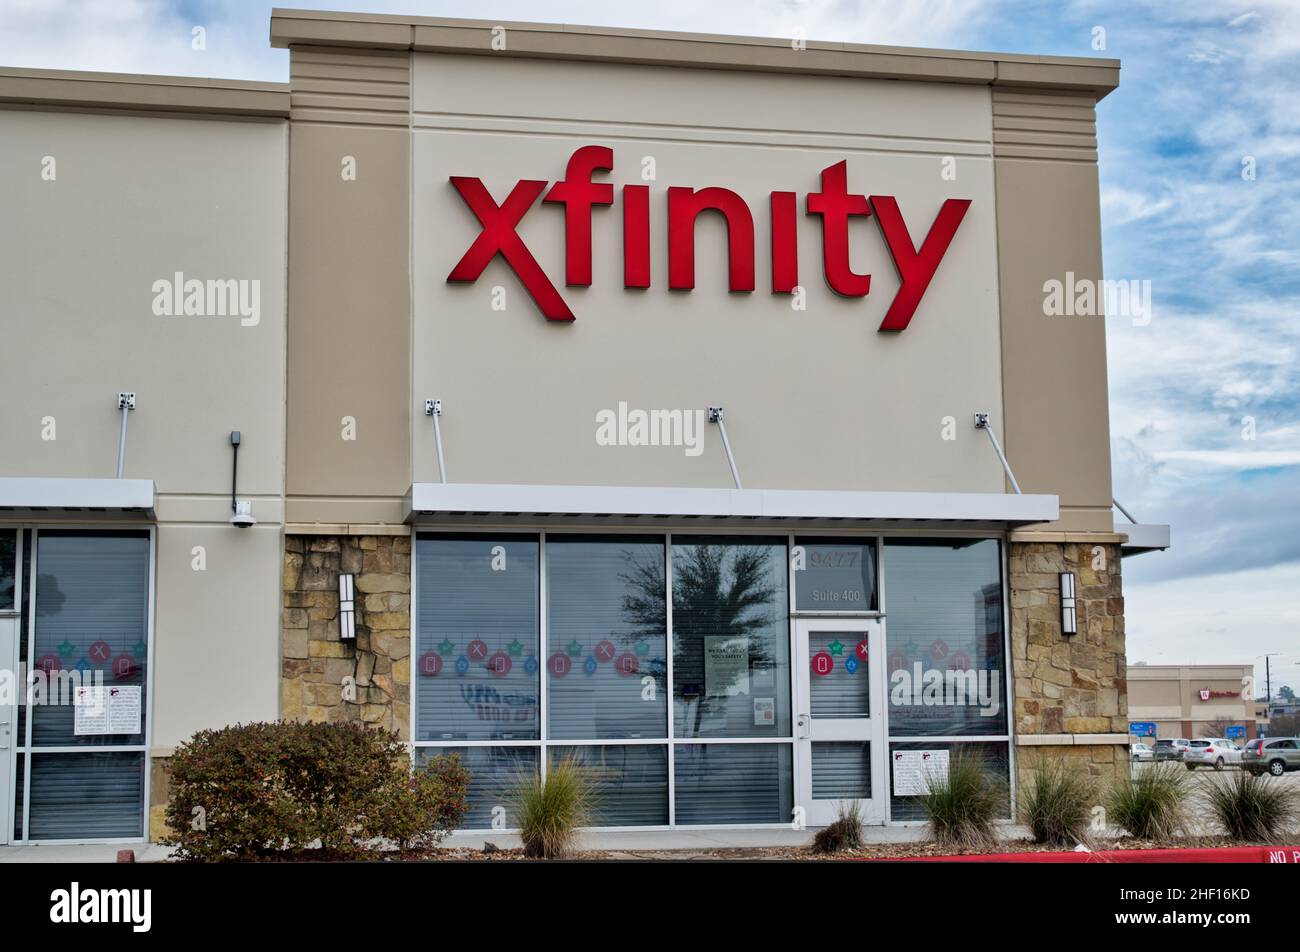 Houston, Texas USA 12-03-2021: Comcast Xfinity business exterior in Houston, TX. Telecommunications business established in 1981. Stock Photo